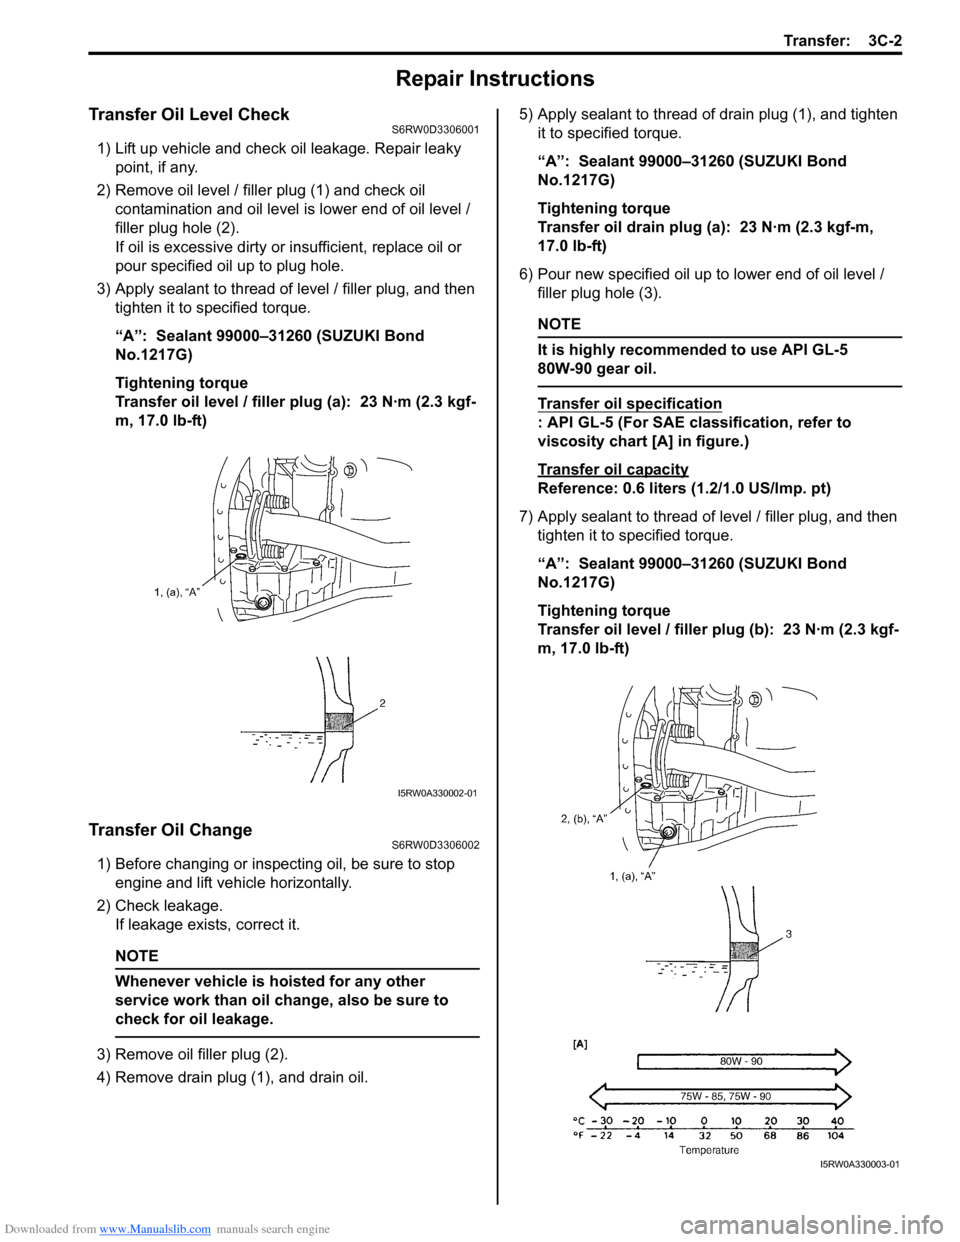 SUZUKI SX4 2006 1.G Service Workshop Manual Downloaded from www.Manualslib.com manuals search engine Transfer: 3C-2
Repair Instructions
Transfer Oil Level CheckS6RW0D3306001
1) Lift up vehicle and check oil leakage. Repair leaky 
point, if any.